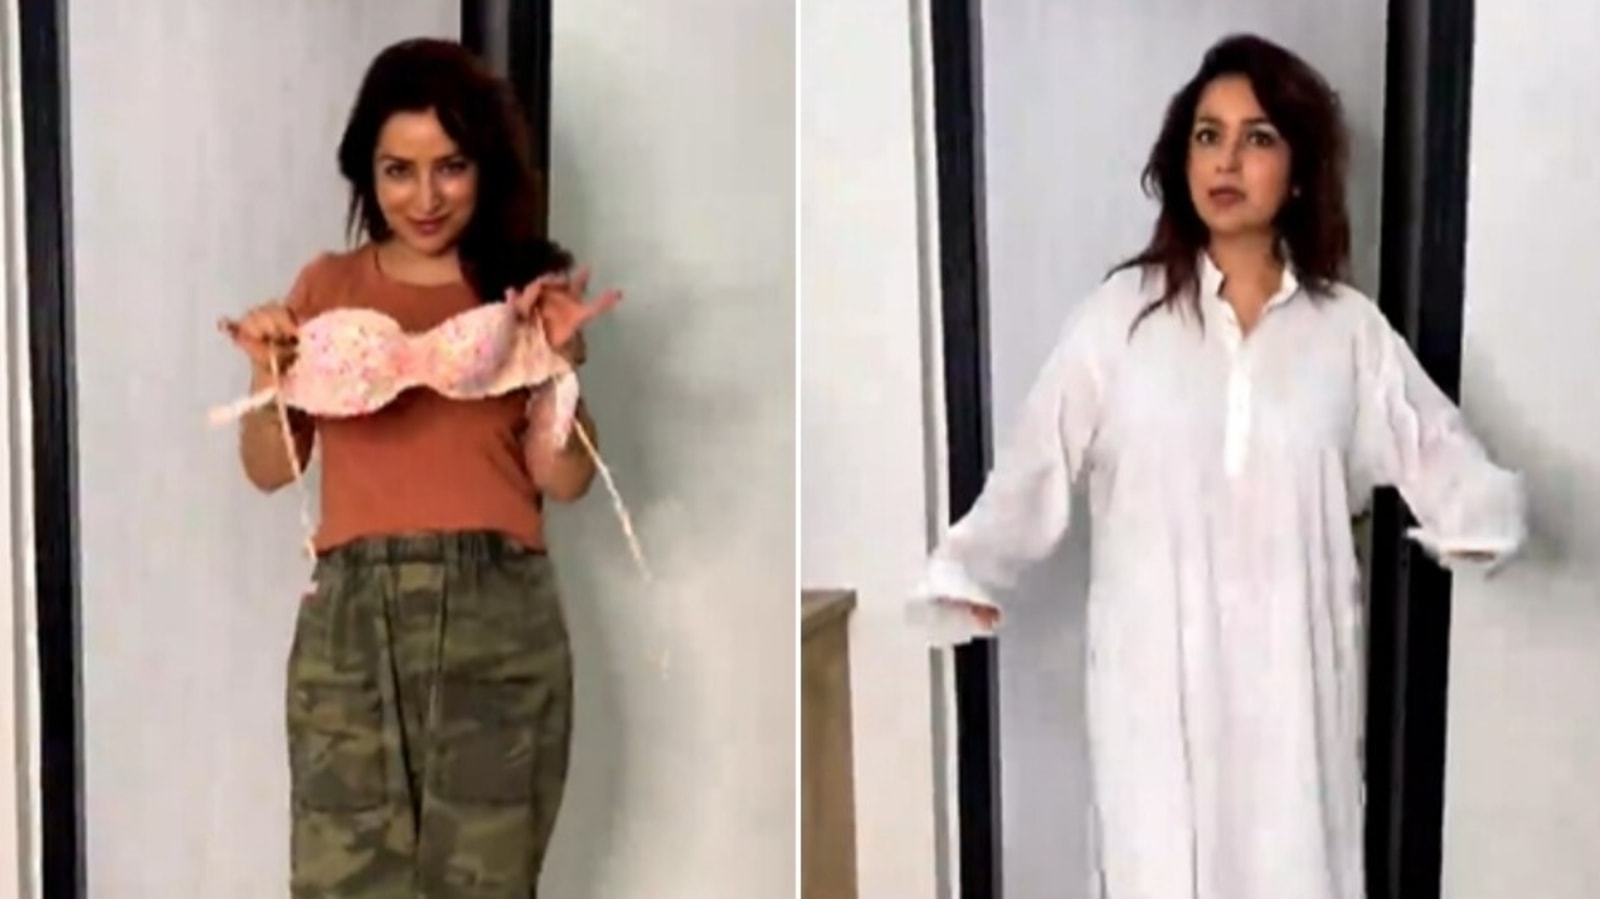 Manav Ka Xxx Video - Tisca Chopra's dad interrupts her as she films video holding swimsuit |  Bollywood - Hindustan Times